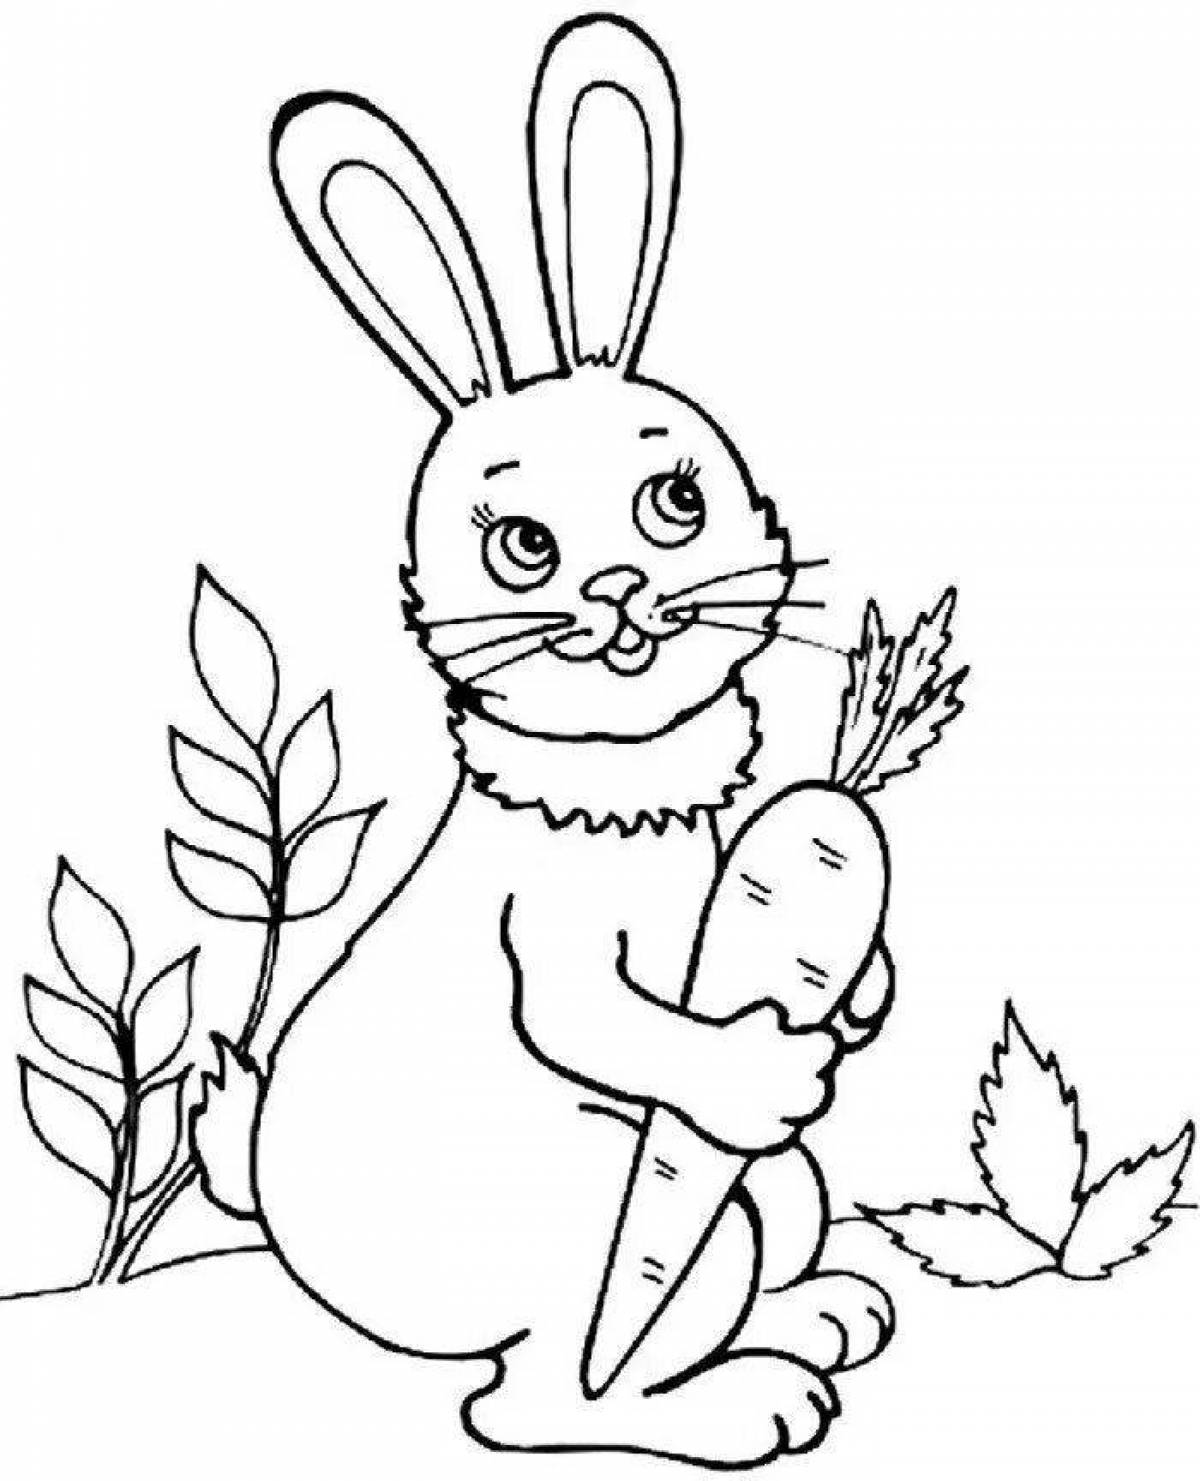 Exquisite coloring drawing of a rabbit